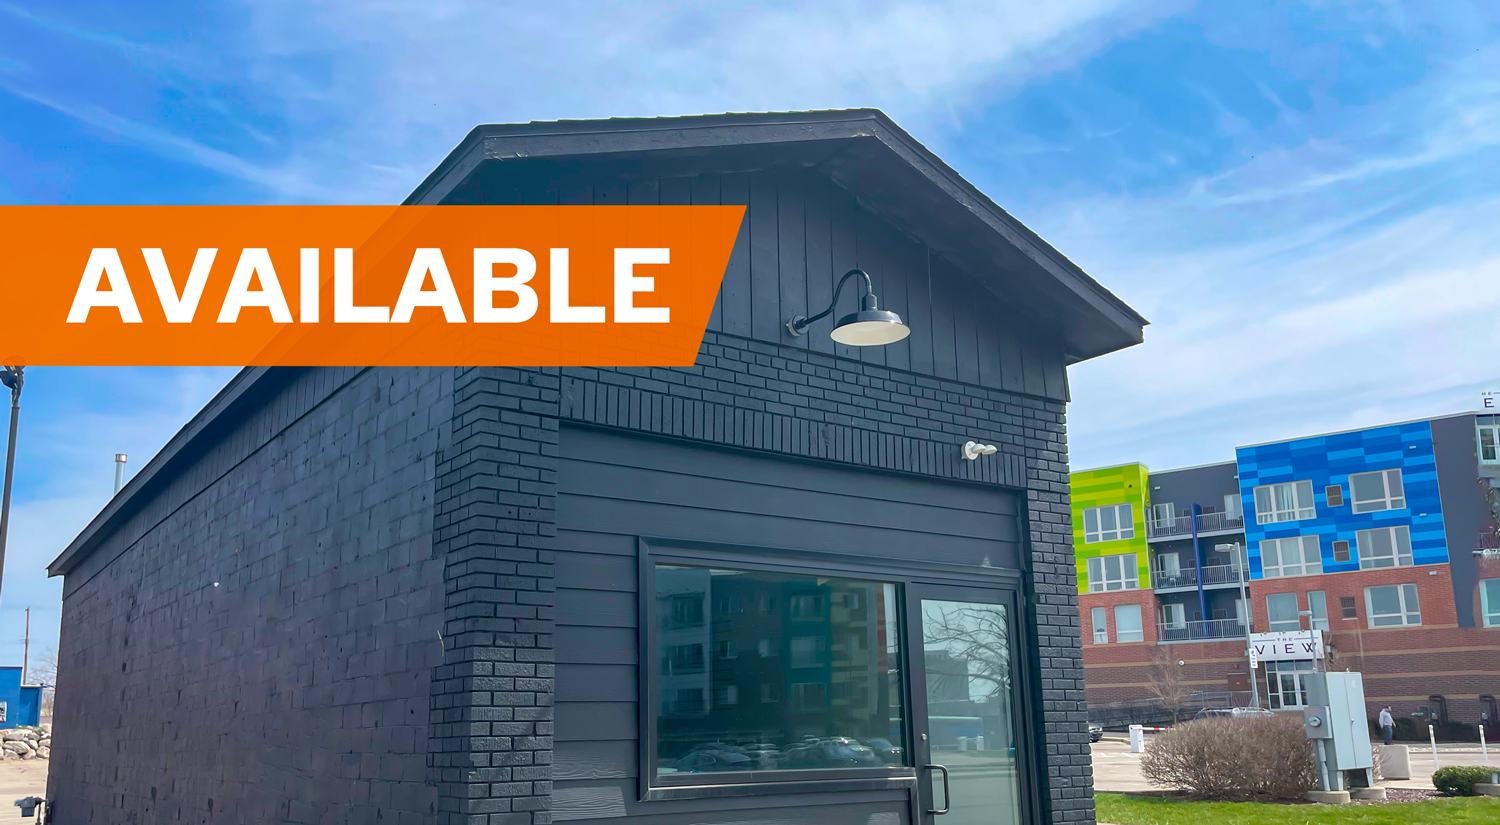 316 N Cedar St is Now Available for commercial lease in Lansing